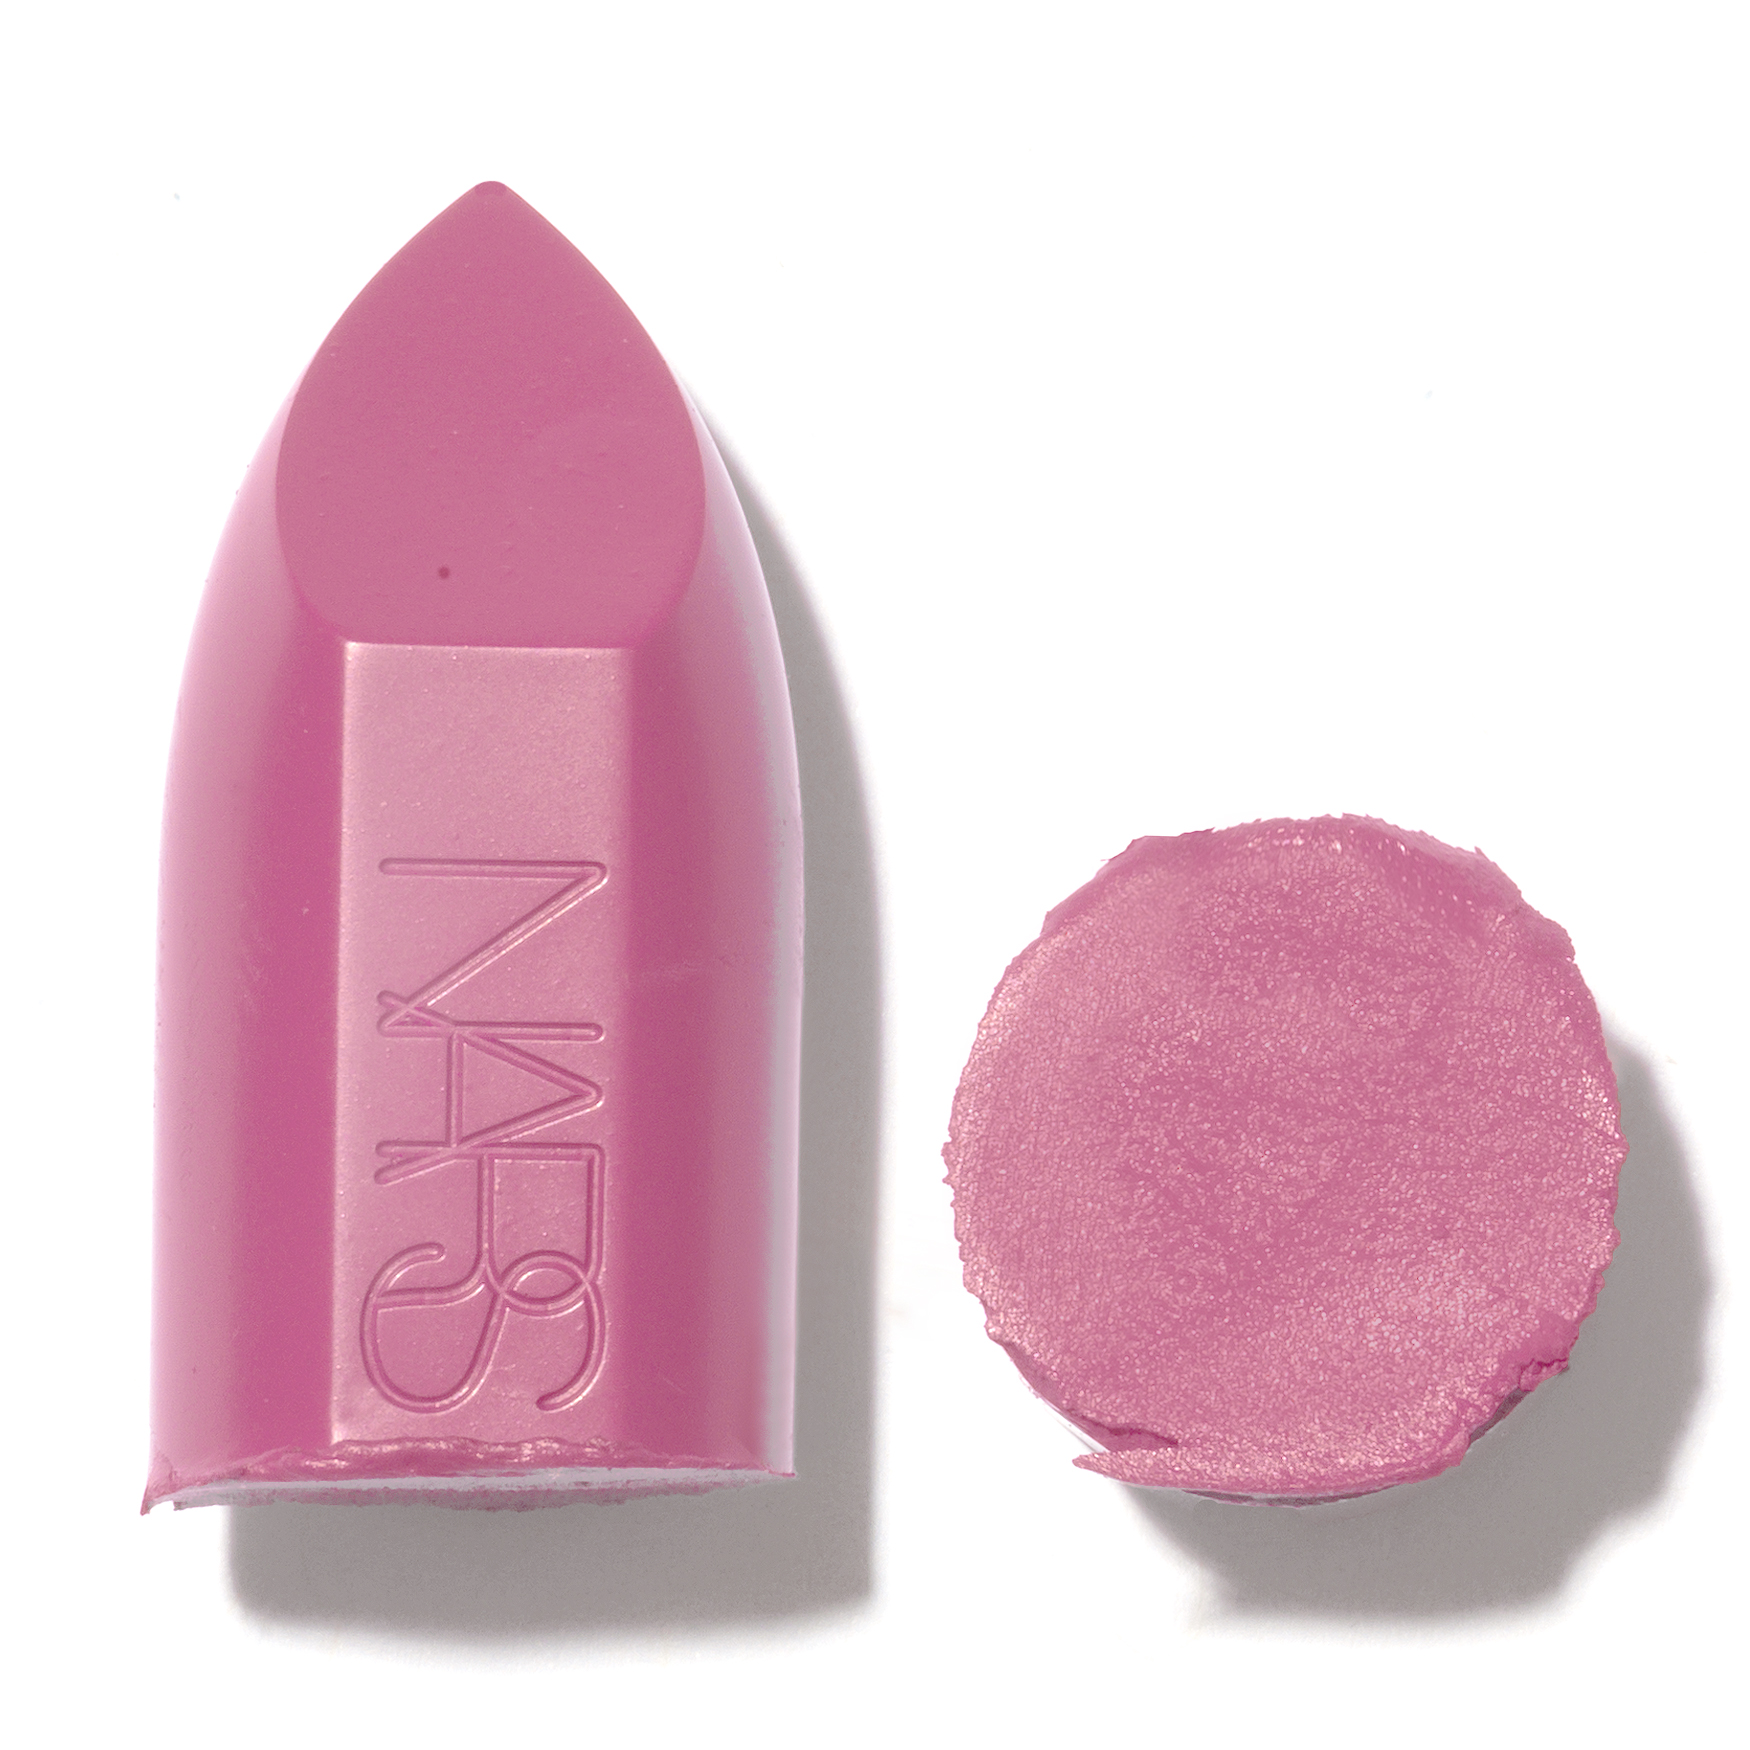 The Convenient Beauty: Review: Wearable bright pink lips - Nars Easy Lover  & Chanel Pink Teaser